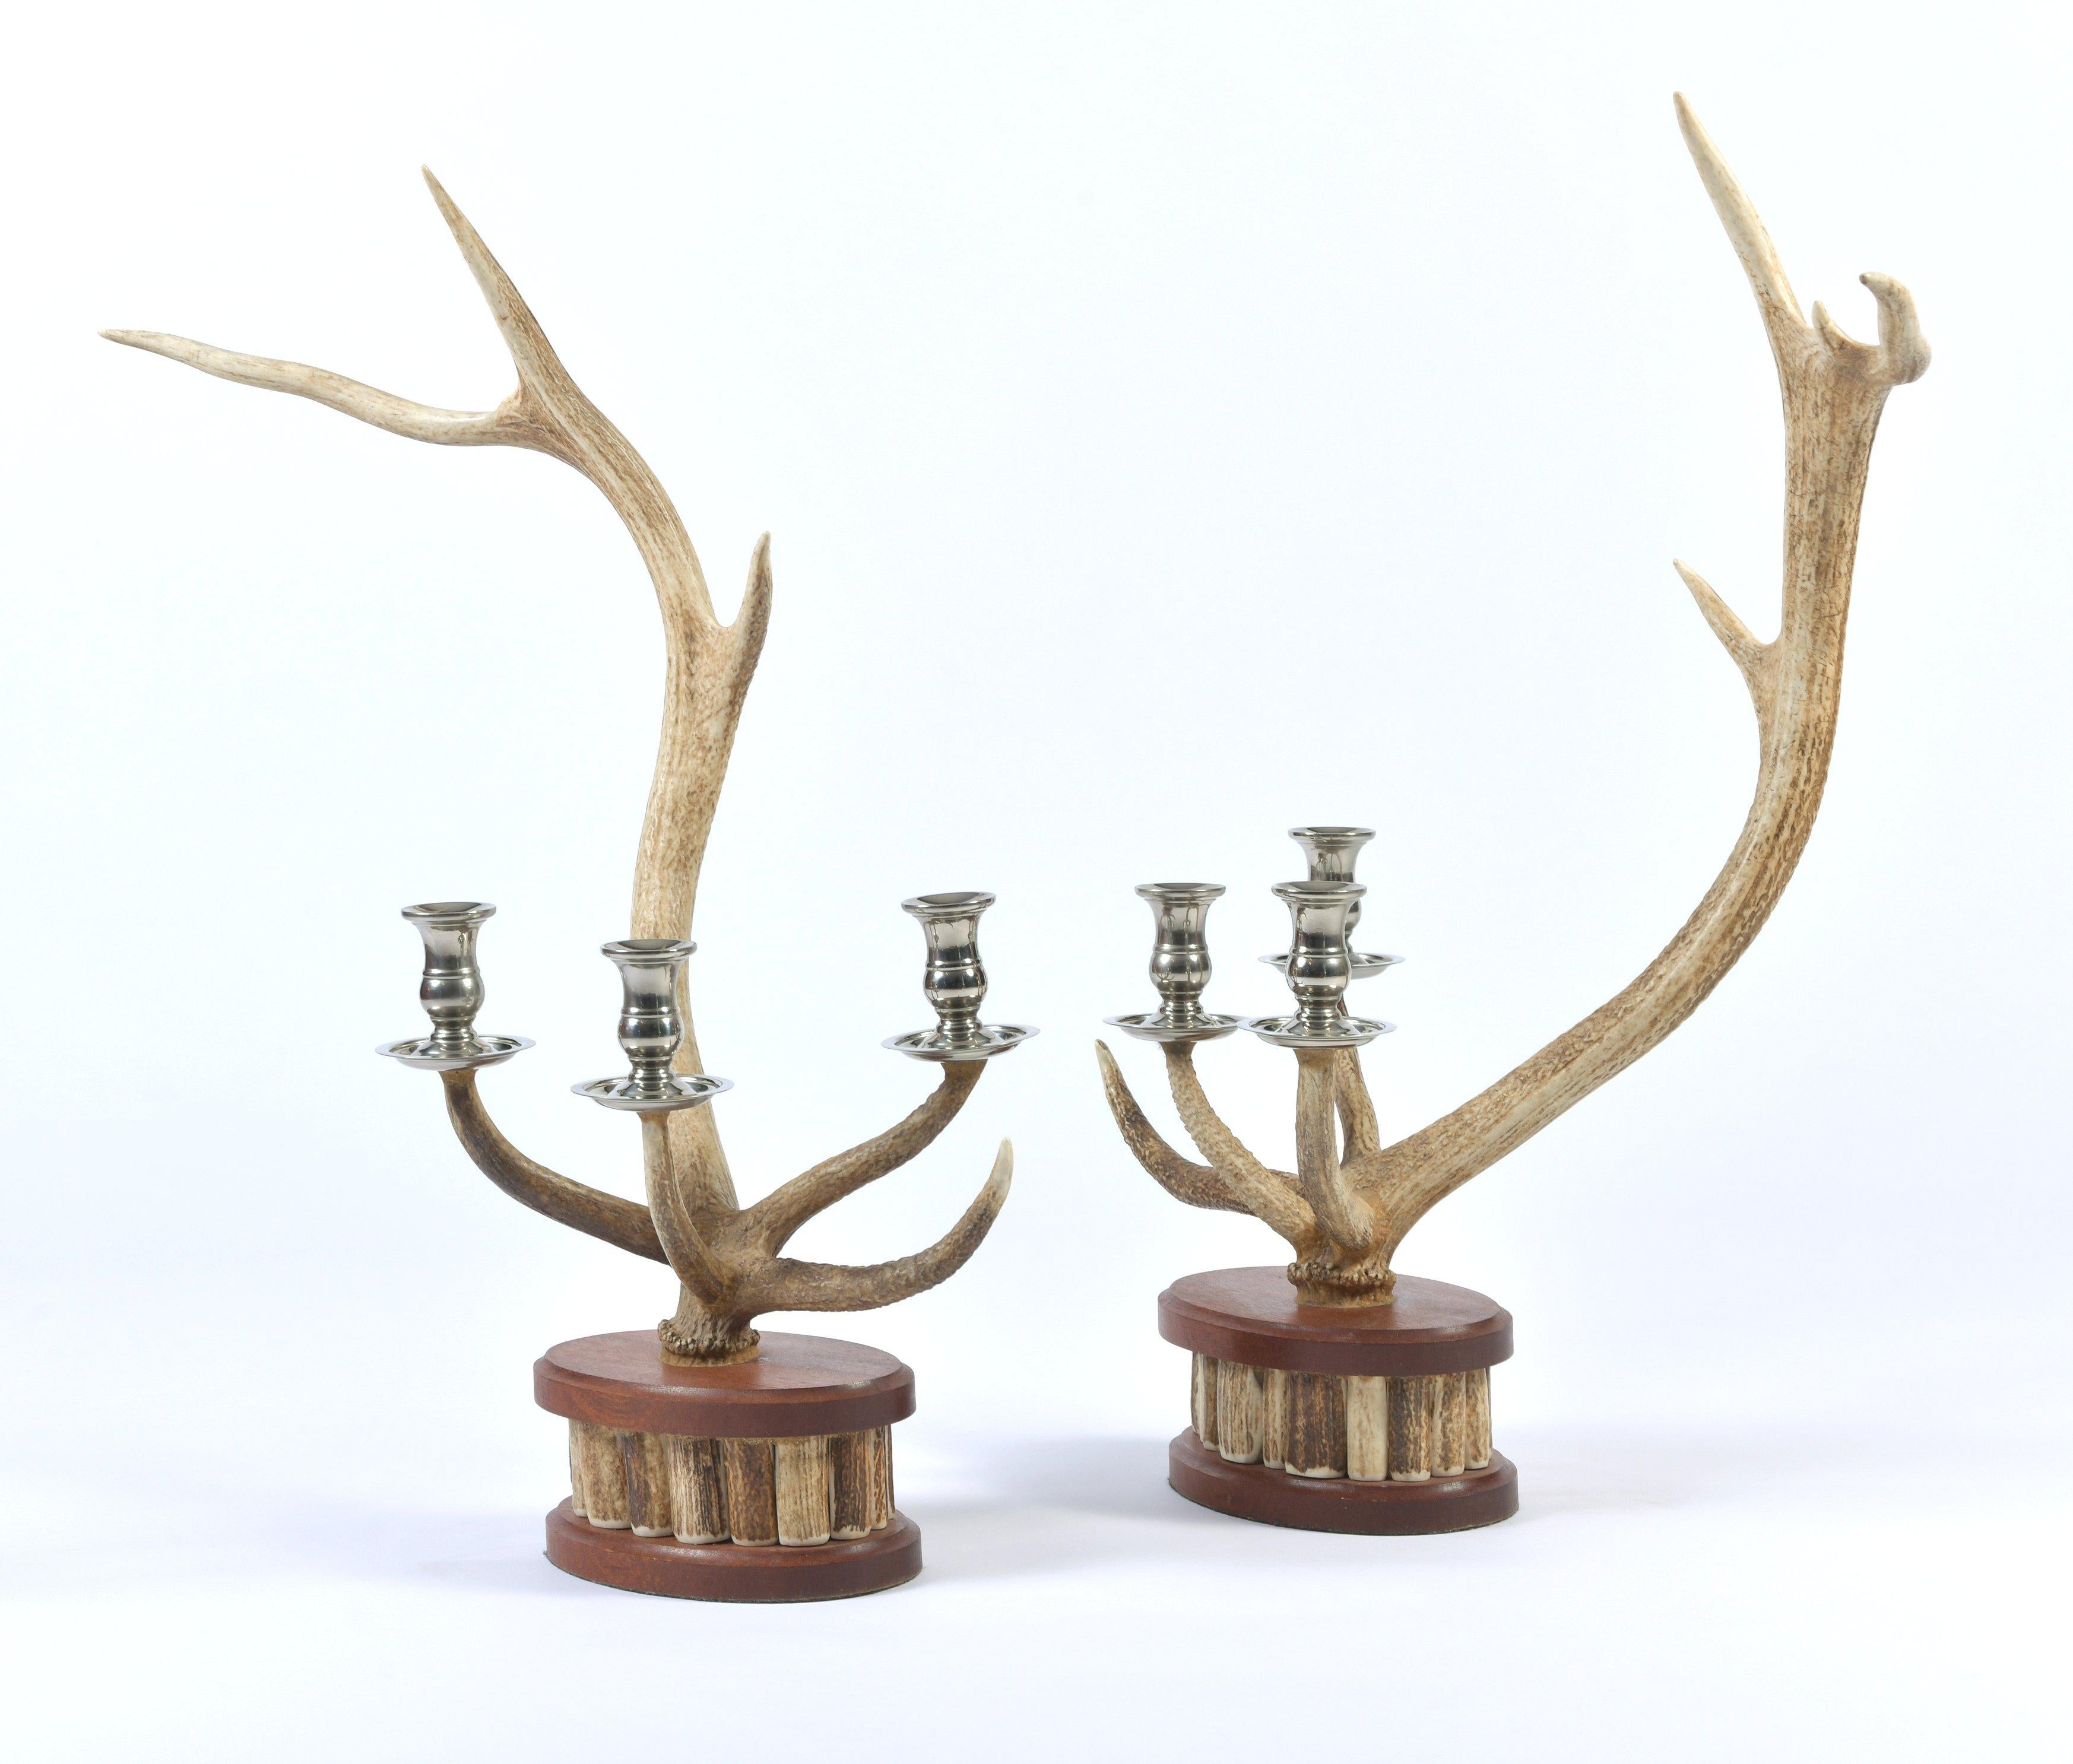 These lovely and unique candlesticks, from red deer antler horn in Scotland is individually crafted and hand made. Each candlestick has 3 nickel-plated candle cups and measures approximately 25 in – 63.5 cm wide, 11 ½ in – 29.3 cm deep and 27 in –